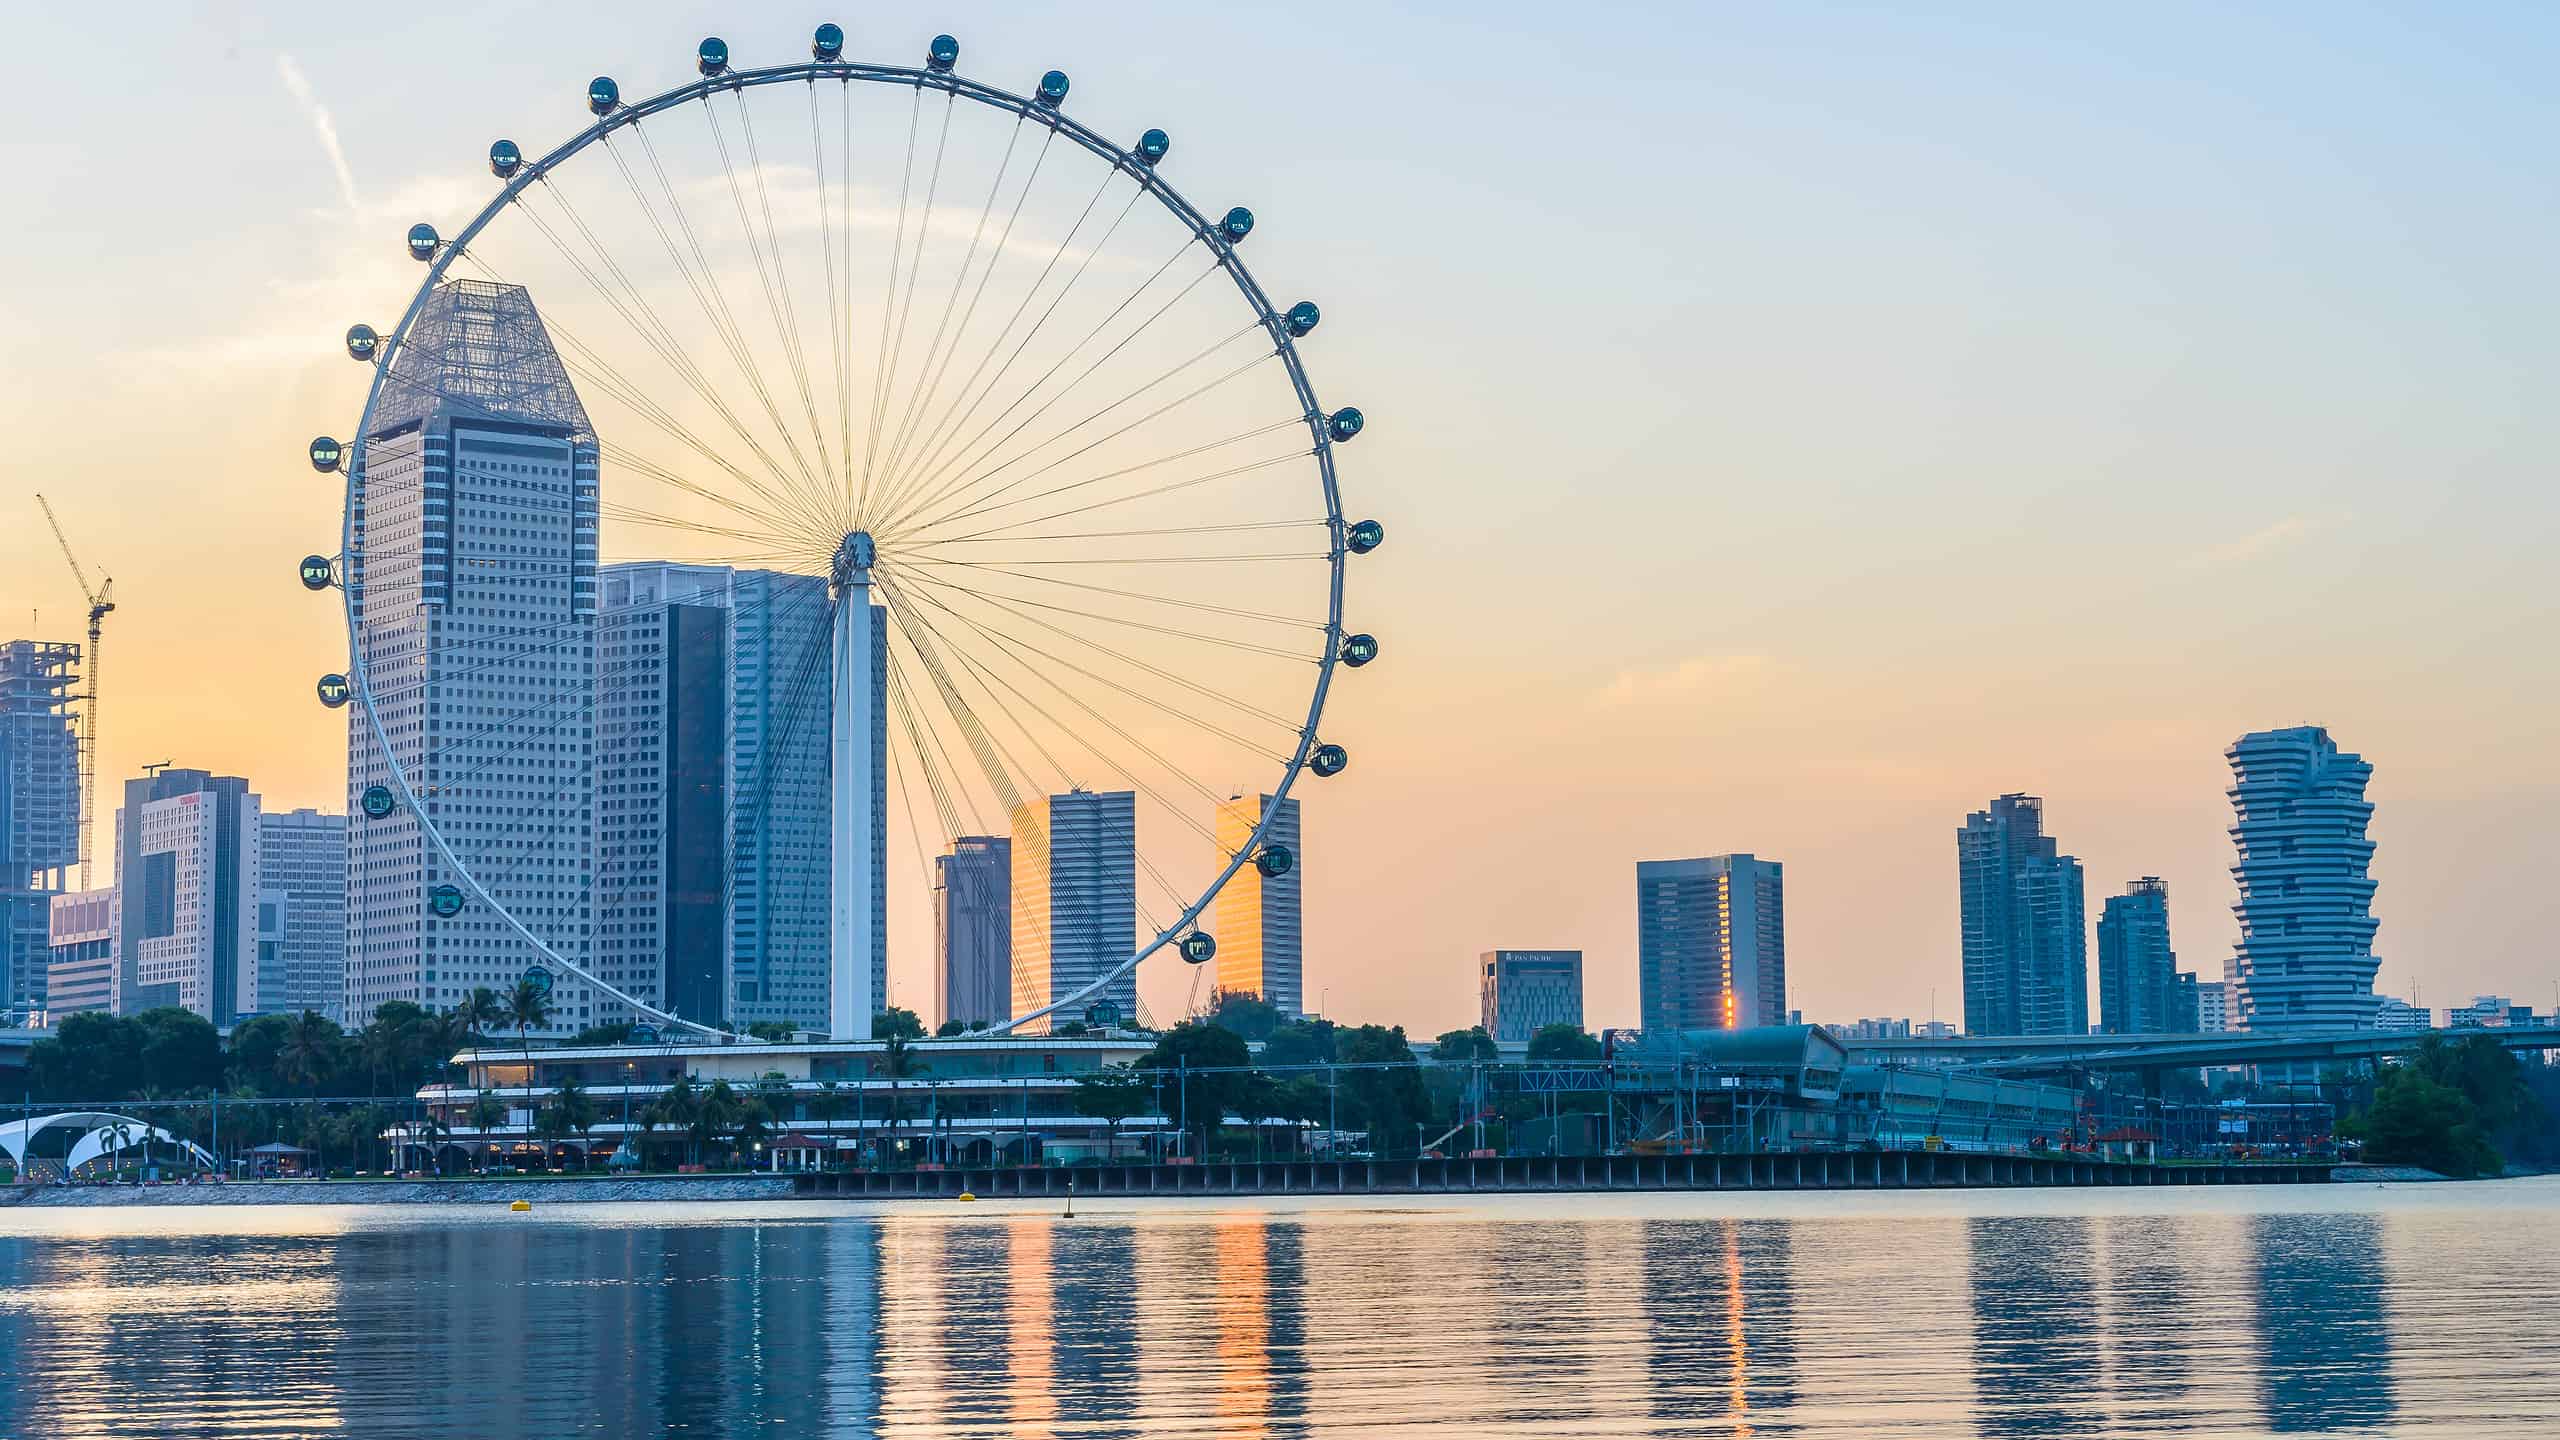 The Singapore Flyer, a large Ferris Wheel in Singapore is visible against a cityscape across an expanse of water.